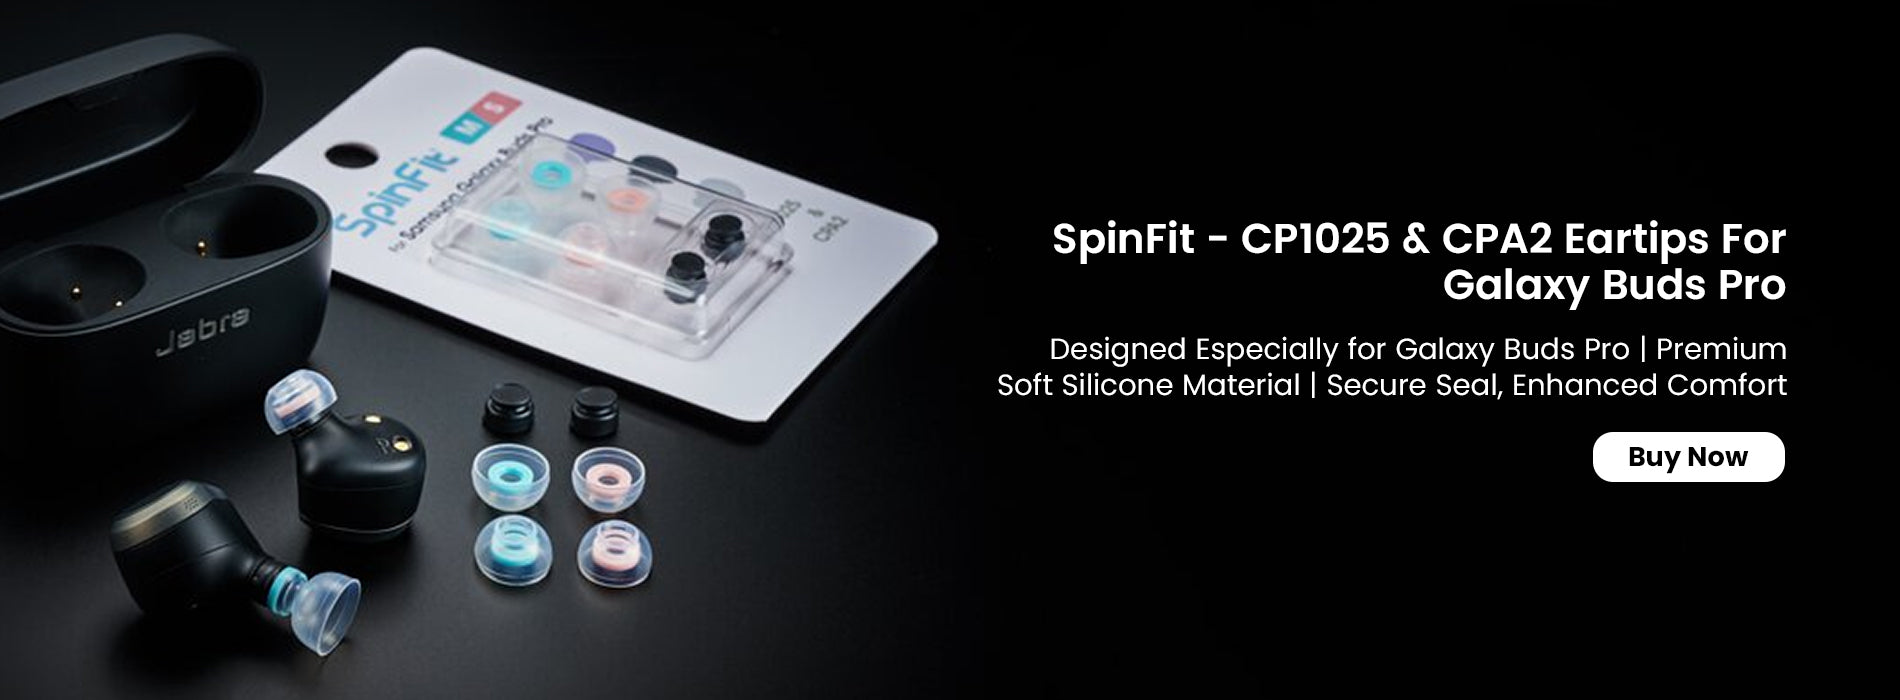 SpinFit - CP1025 CPA2 Eartips For Galaxy Buds